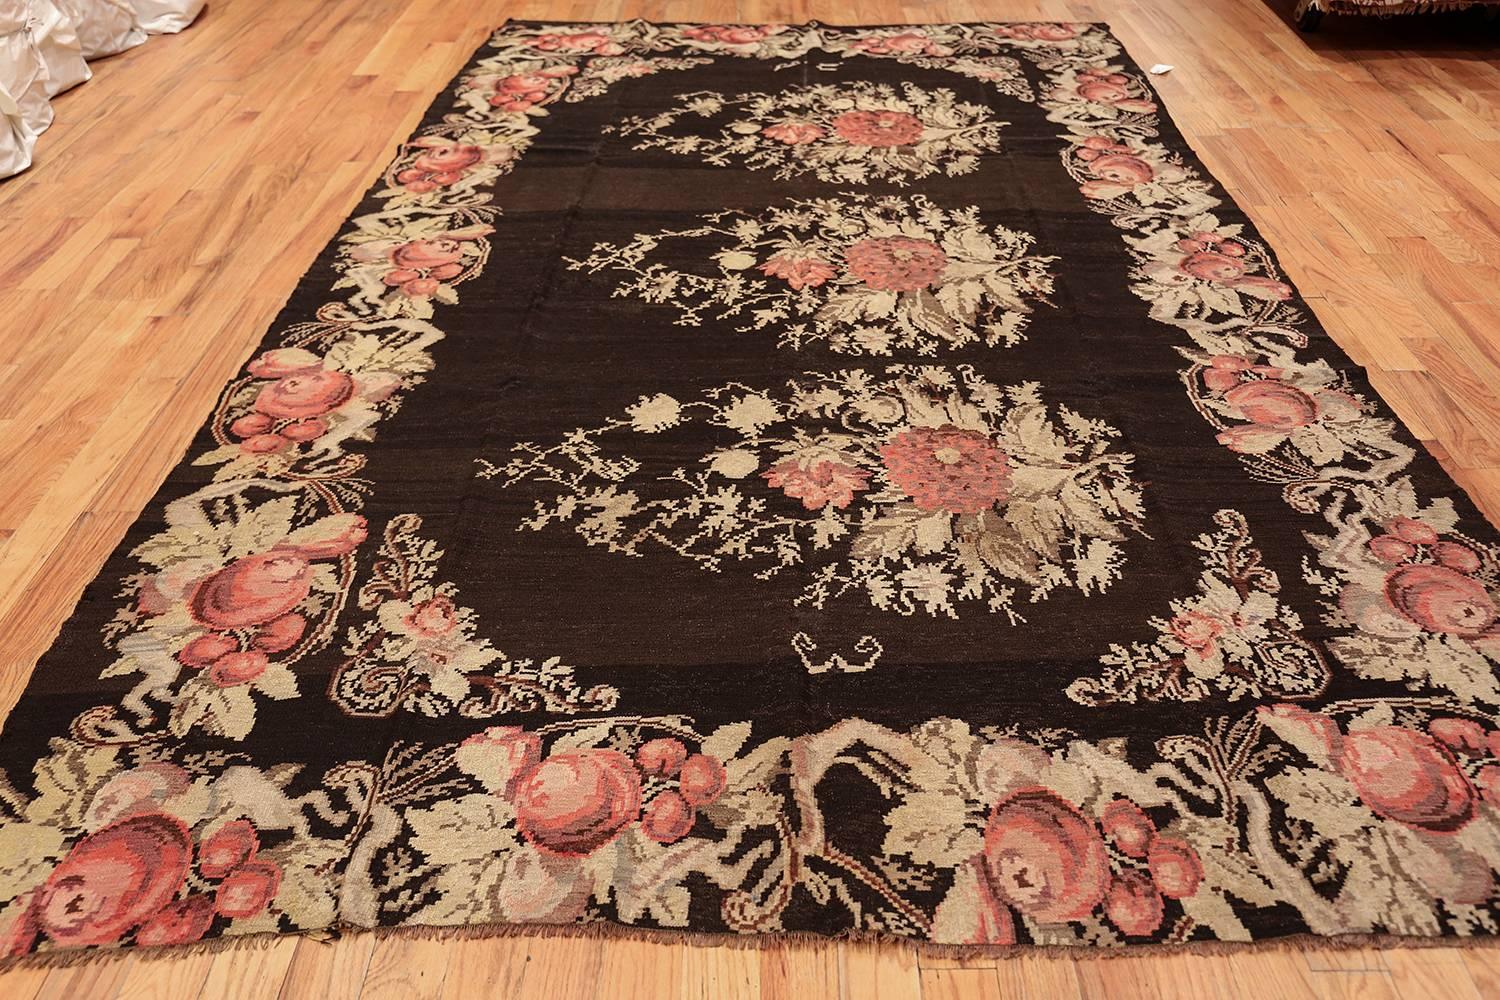 Three perfectly stitched bouquets are splayed across the center of this antique Bessarabian rug, each displaying floral red roses, detailed with shaded petals and surrounded by desaturated yellow and green leaves. The light colors are set off